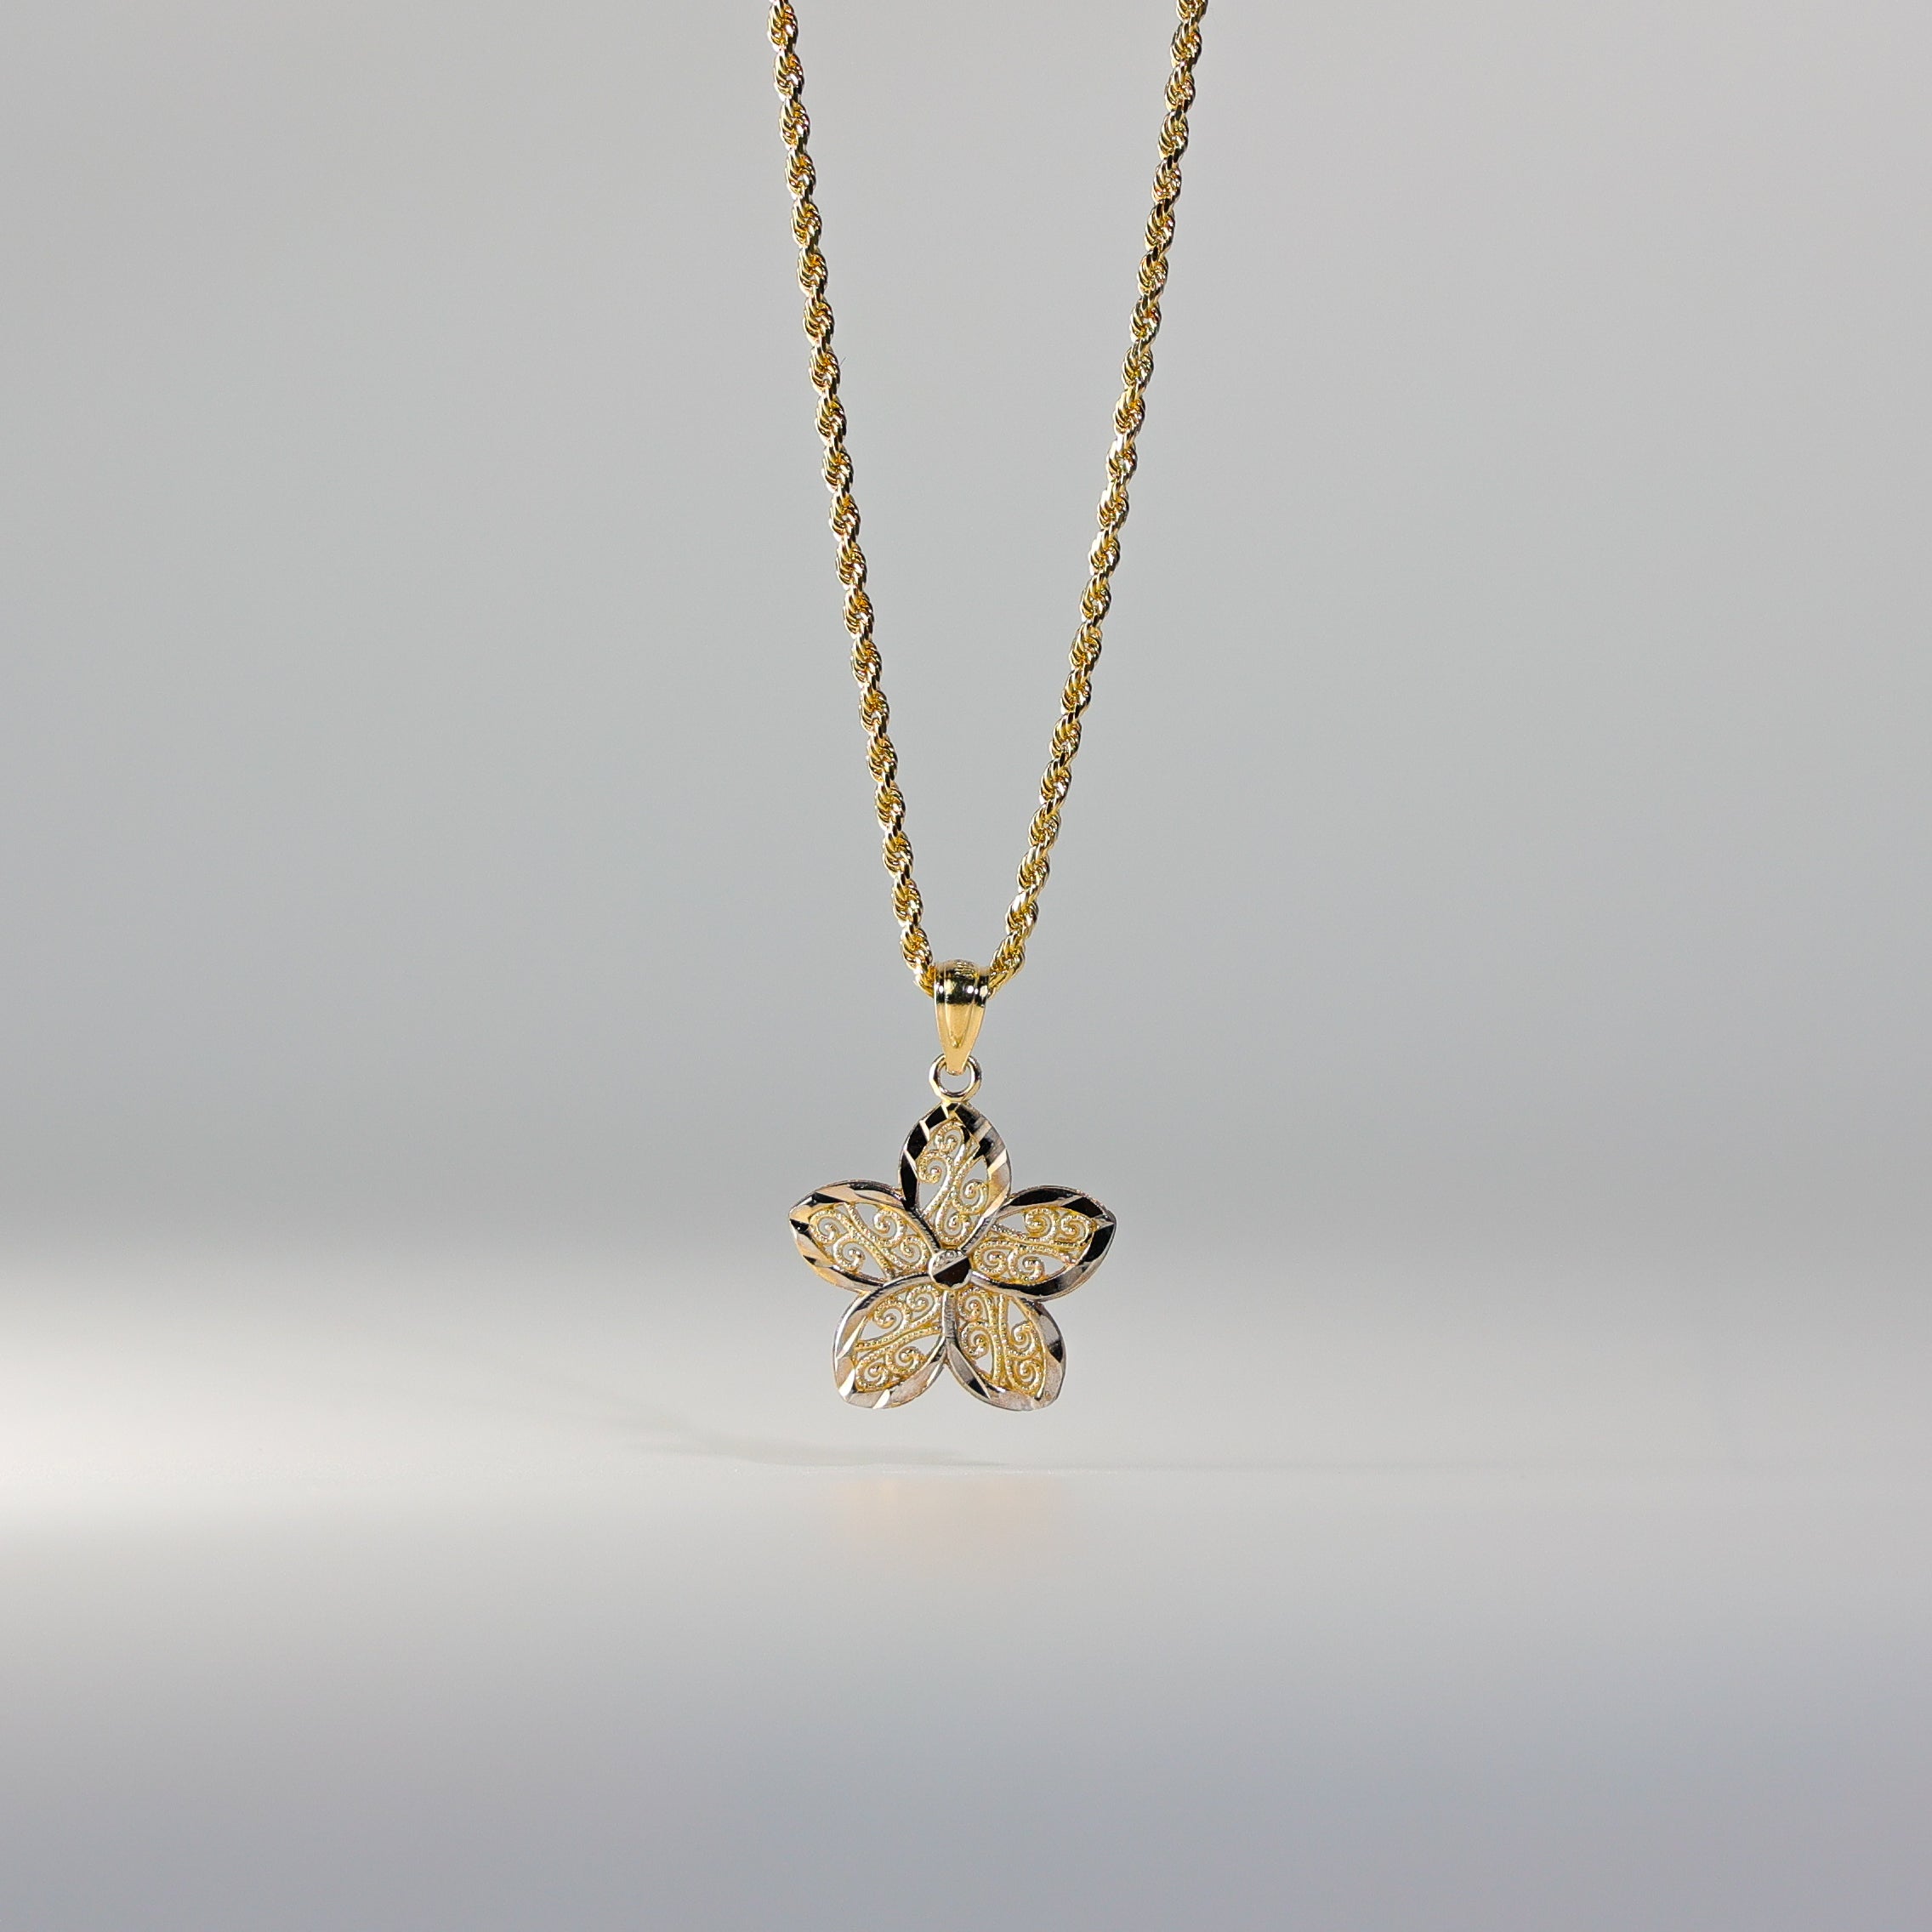 Gold Flower Pendant Model-432 - Charlie & Co. Jewelry